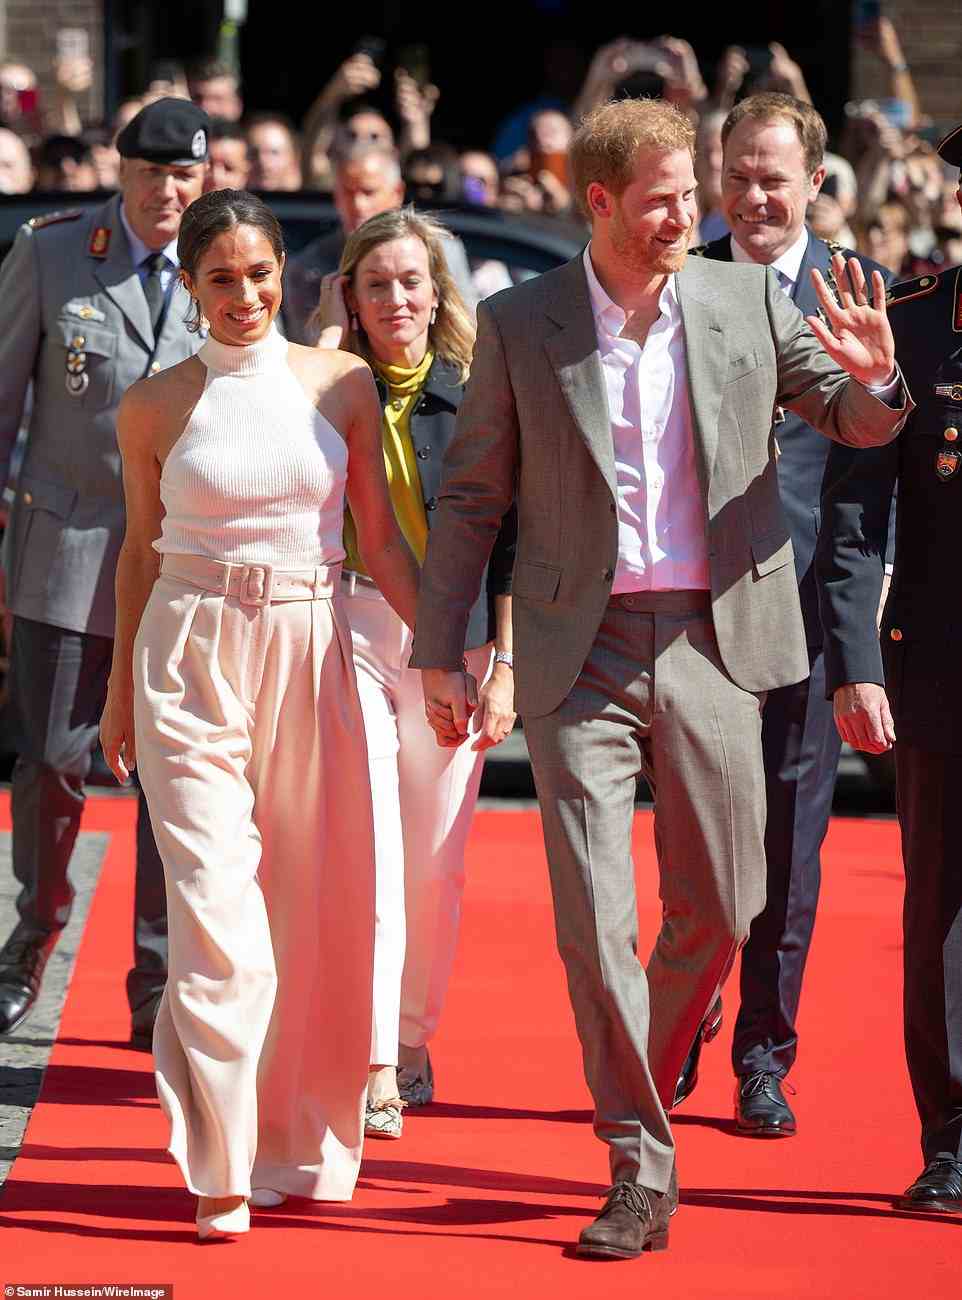 Prince Harry, Duke of Sussex and Meghan, Duchess of Sussex on the red carpet during the Invictus Games Dusseldorf 2023 - One Year To Go launch event